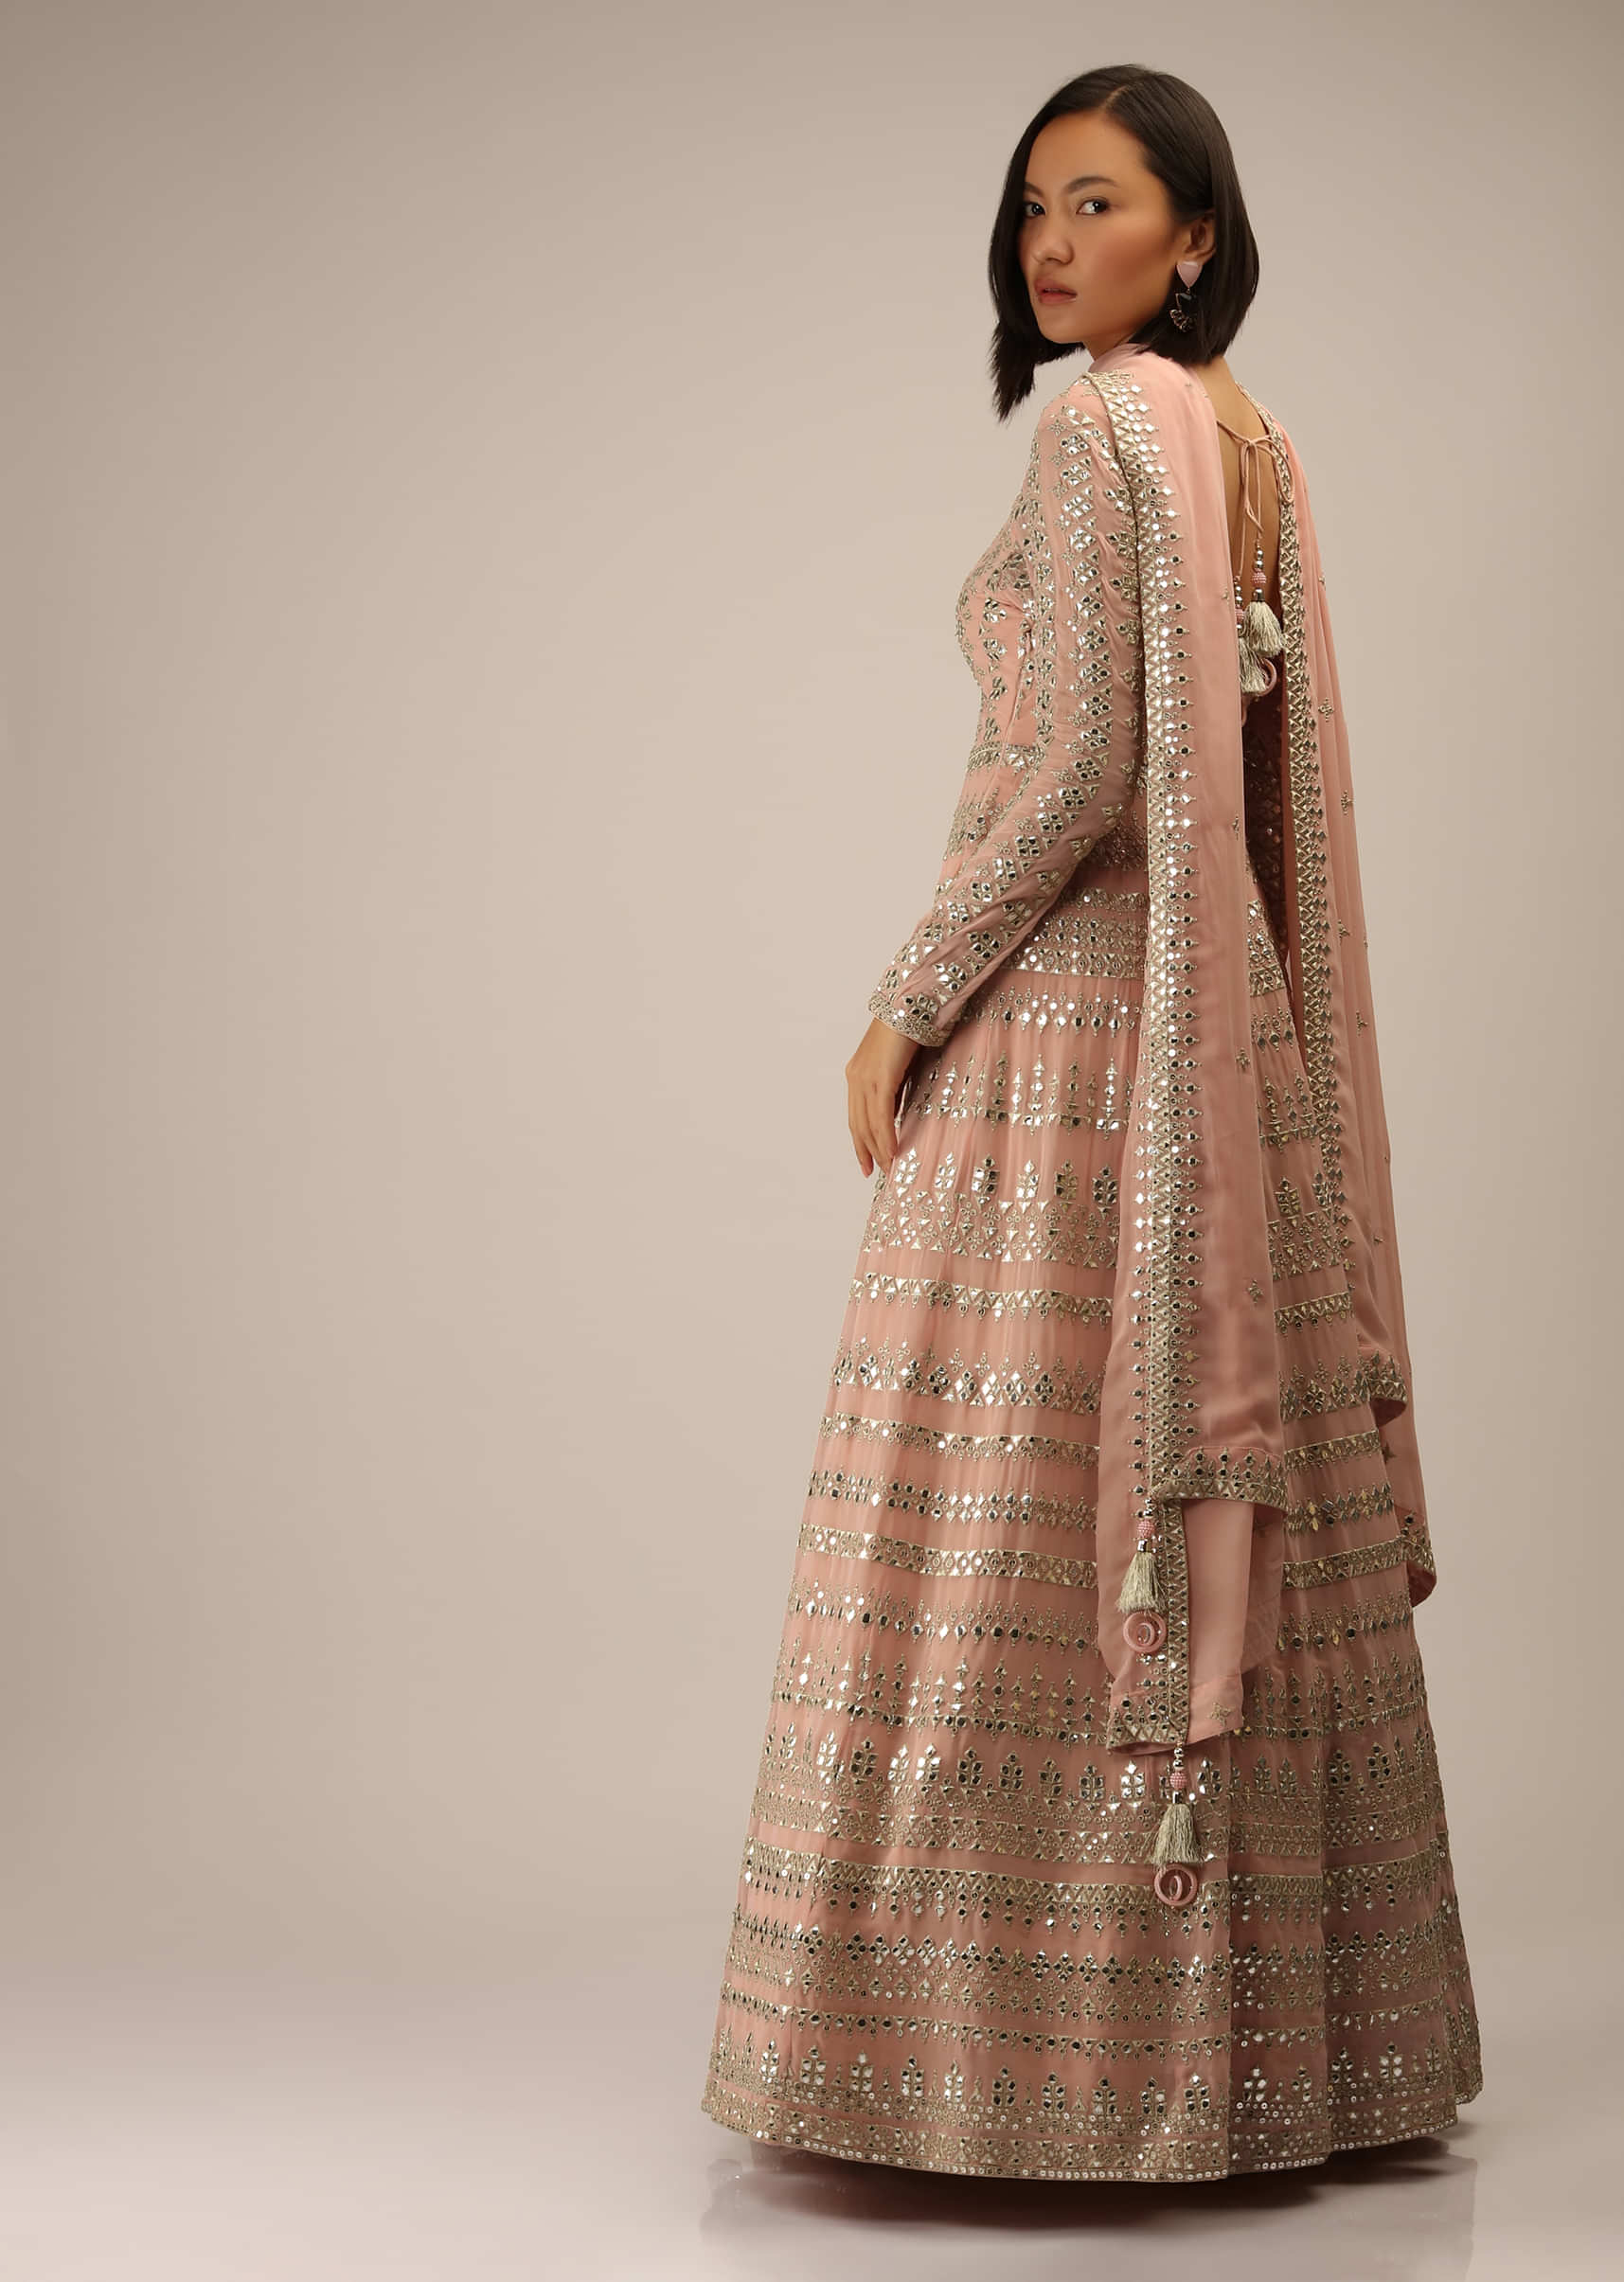 Salmon Pink Anarkali Suit In Georgette With Abla And Zari Embroidered Geometric Design And Churidar Sleeves